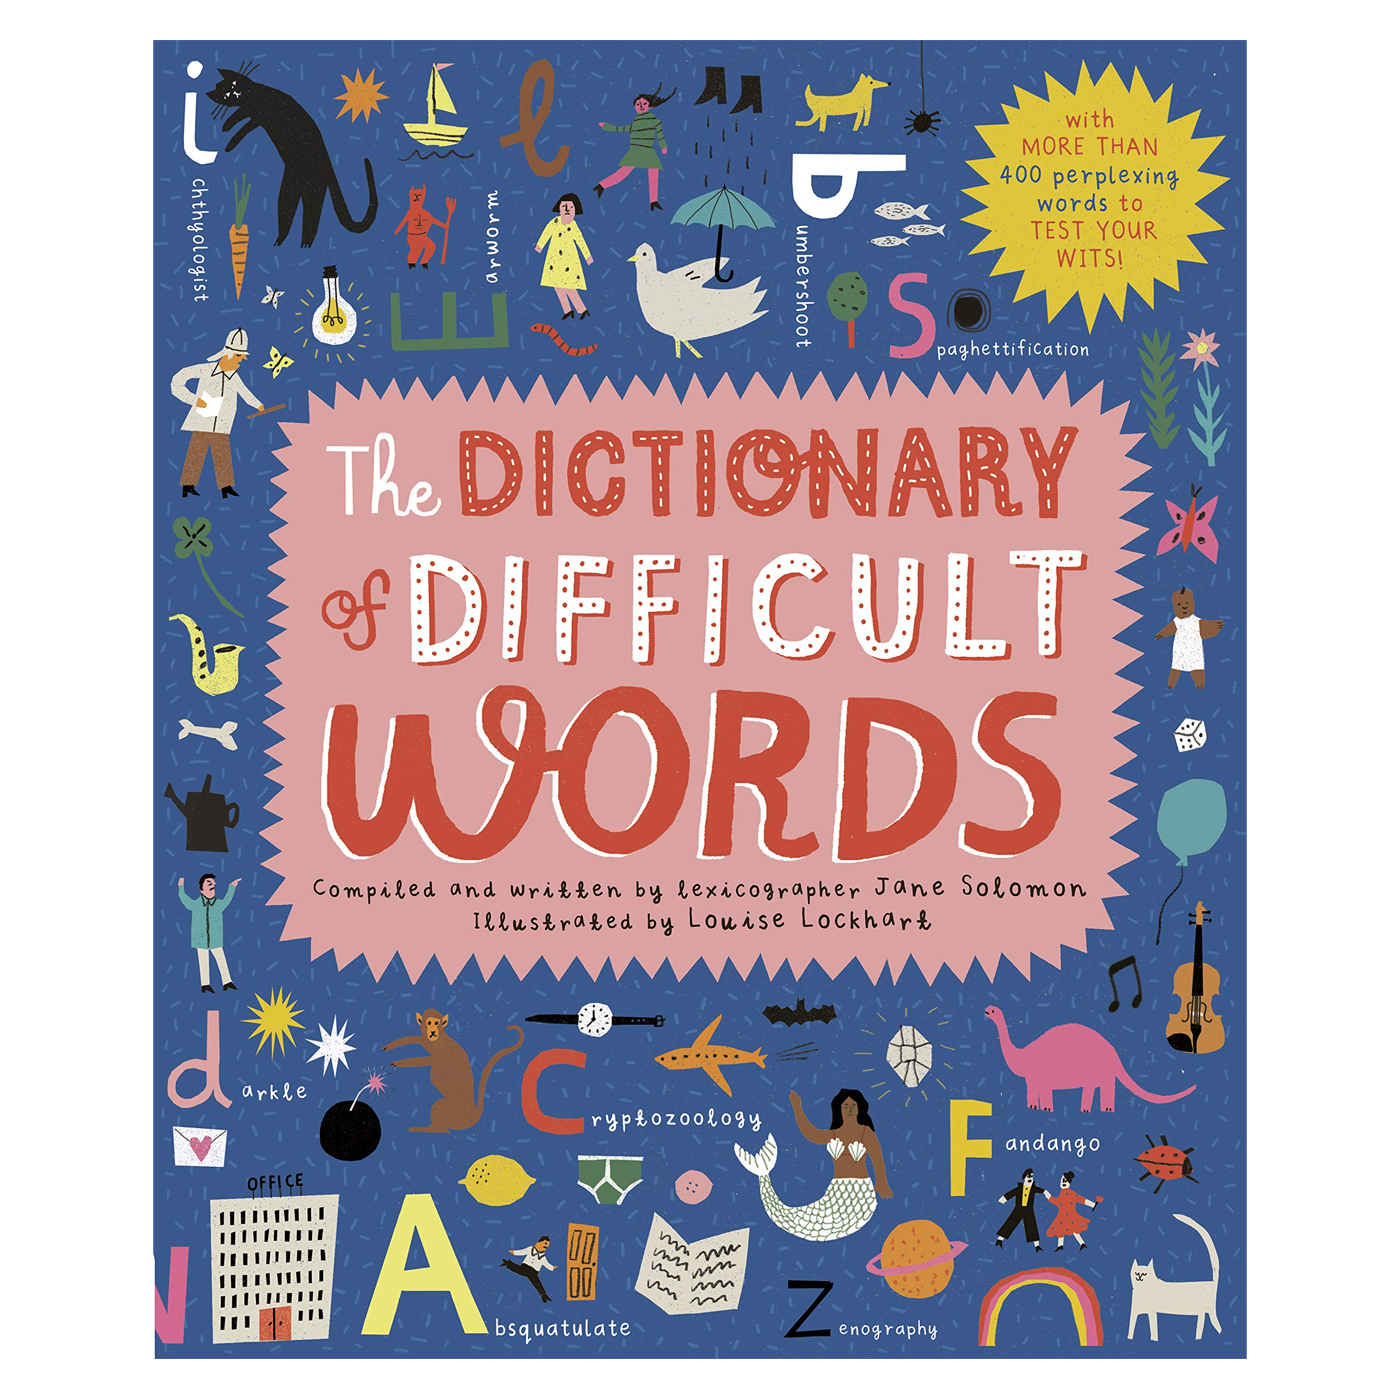 FRANCES LINCOLN The Dictionary of Difficult Words